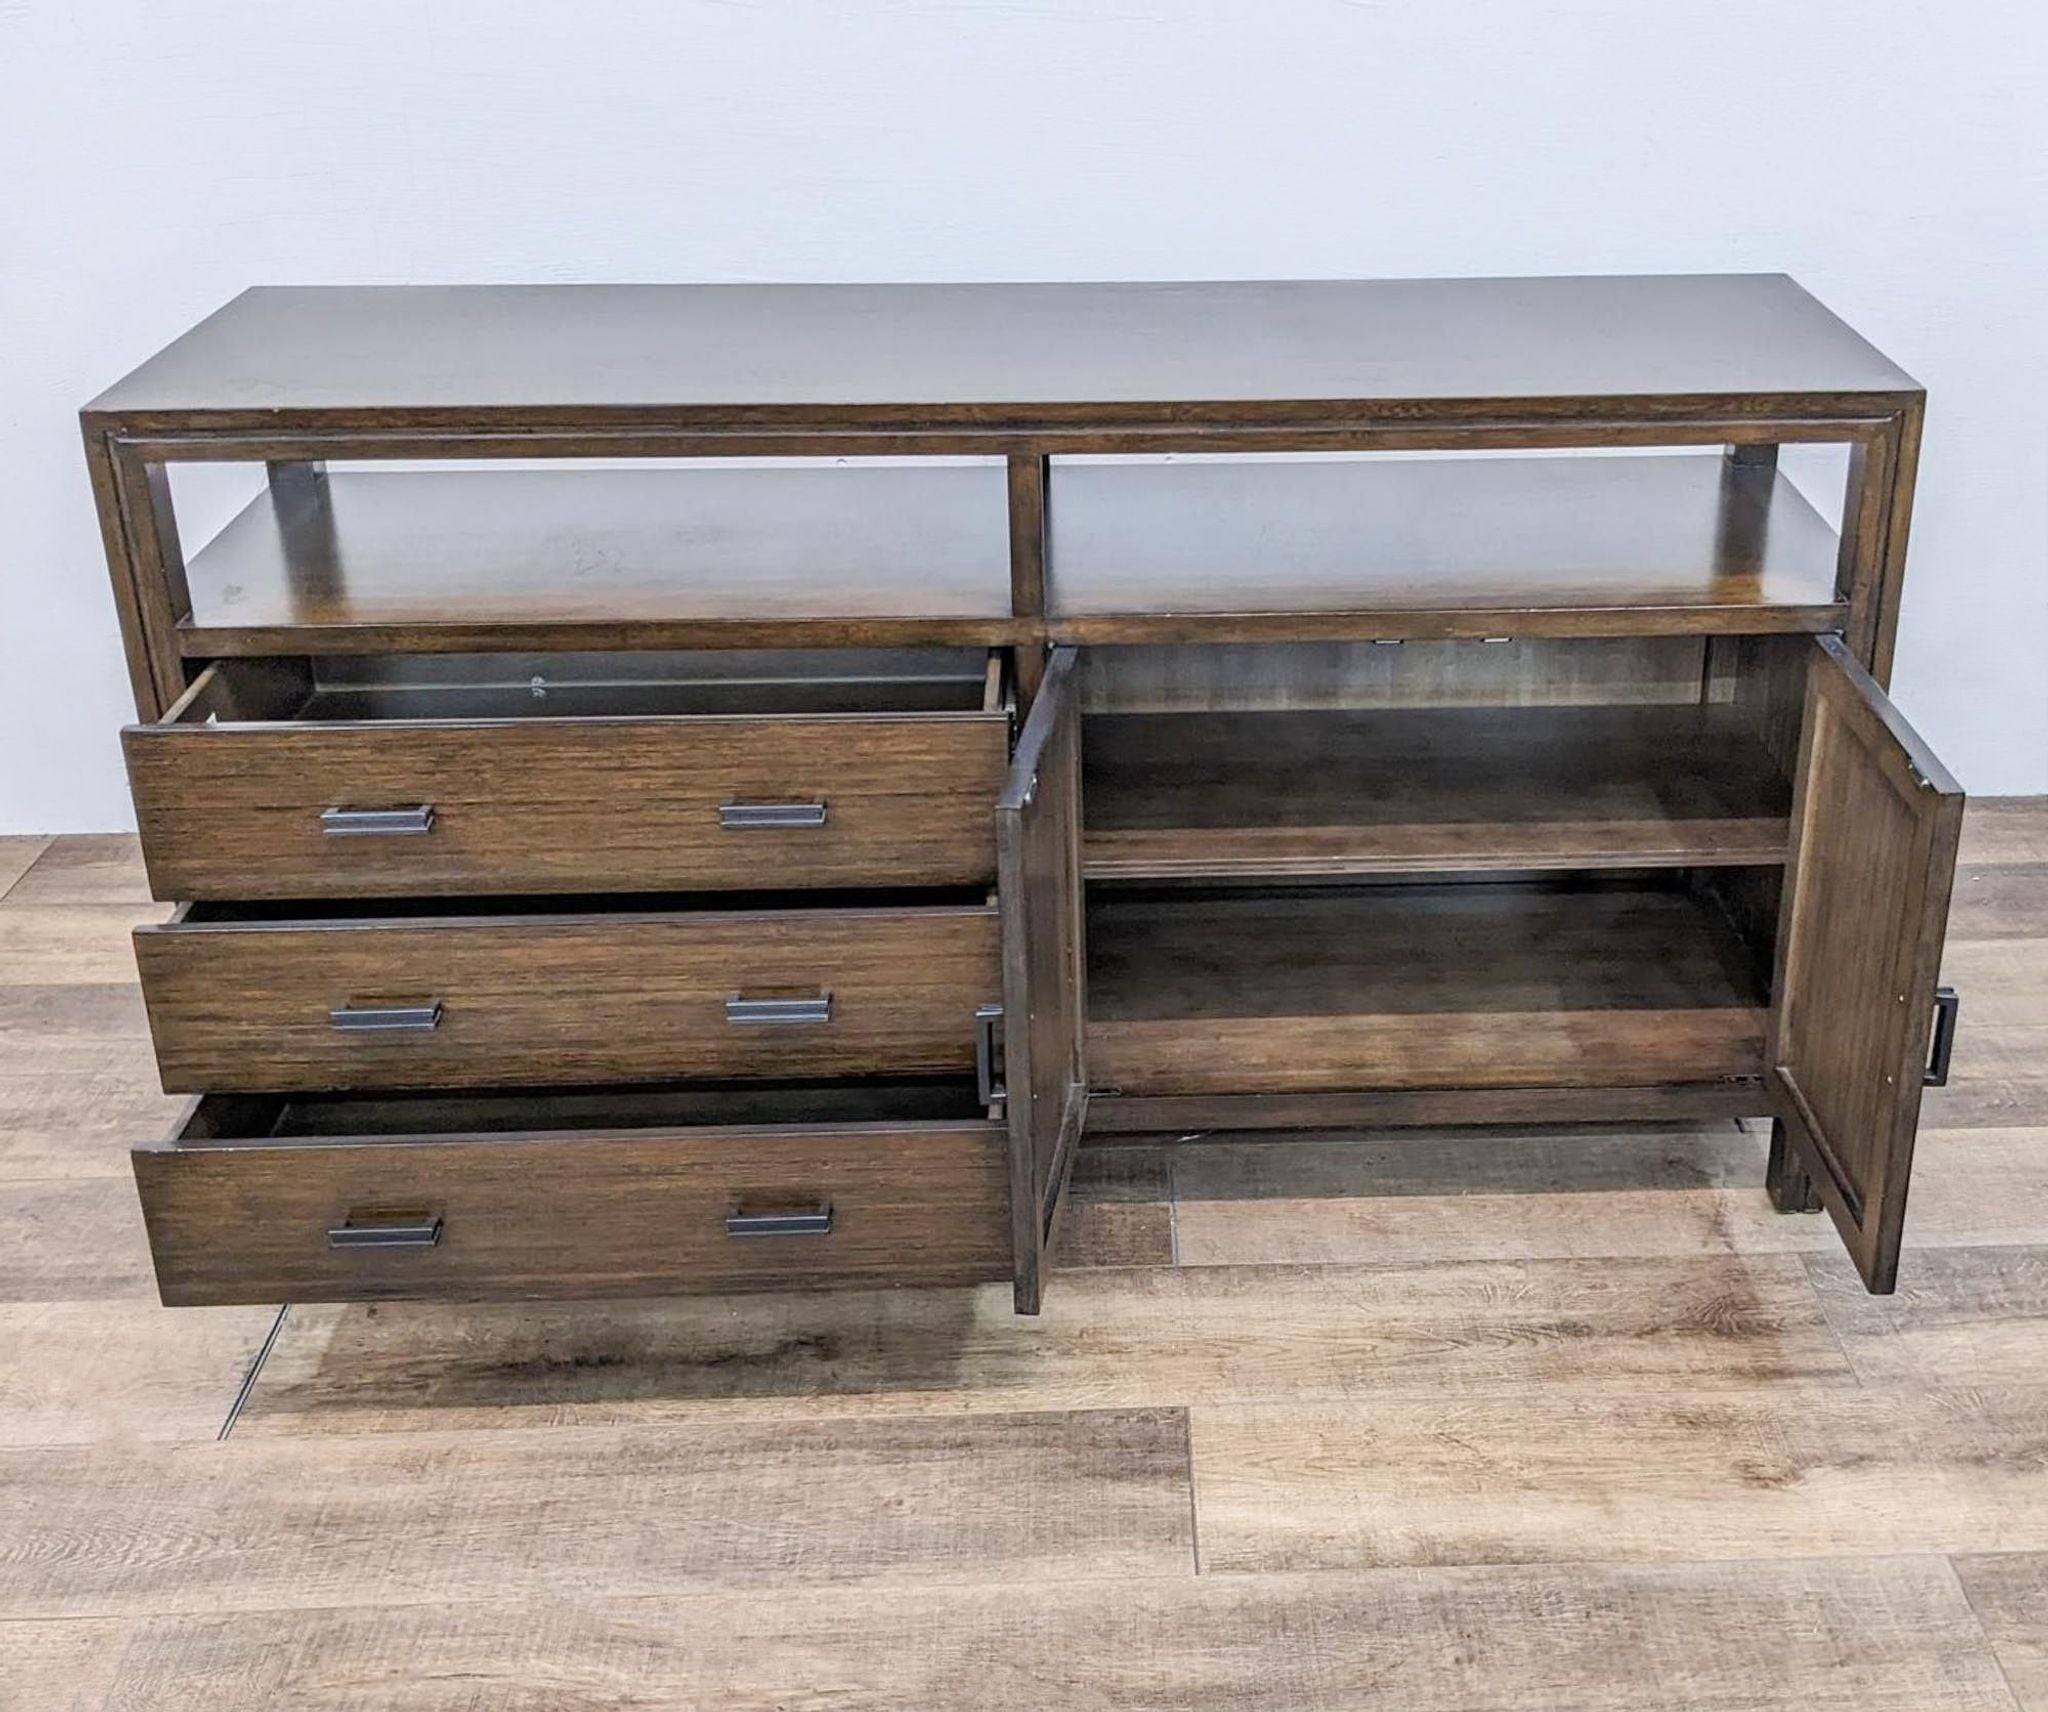 Crate & Barrel entertainment center, showing open drawers and a cabinet, on a wooden floor.